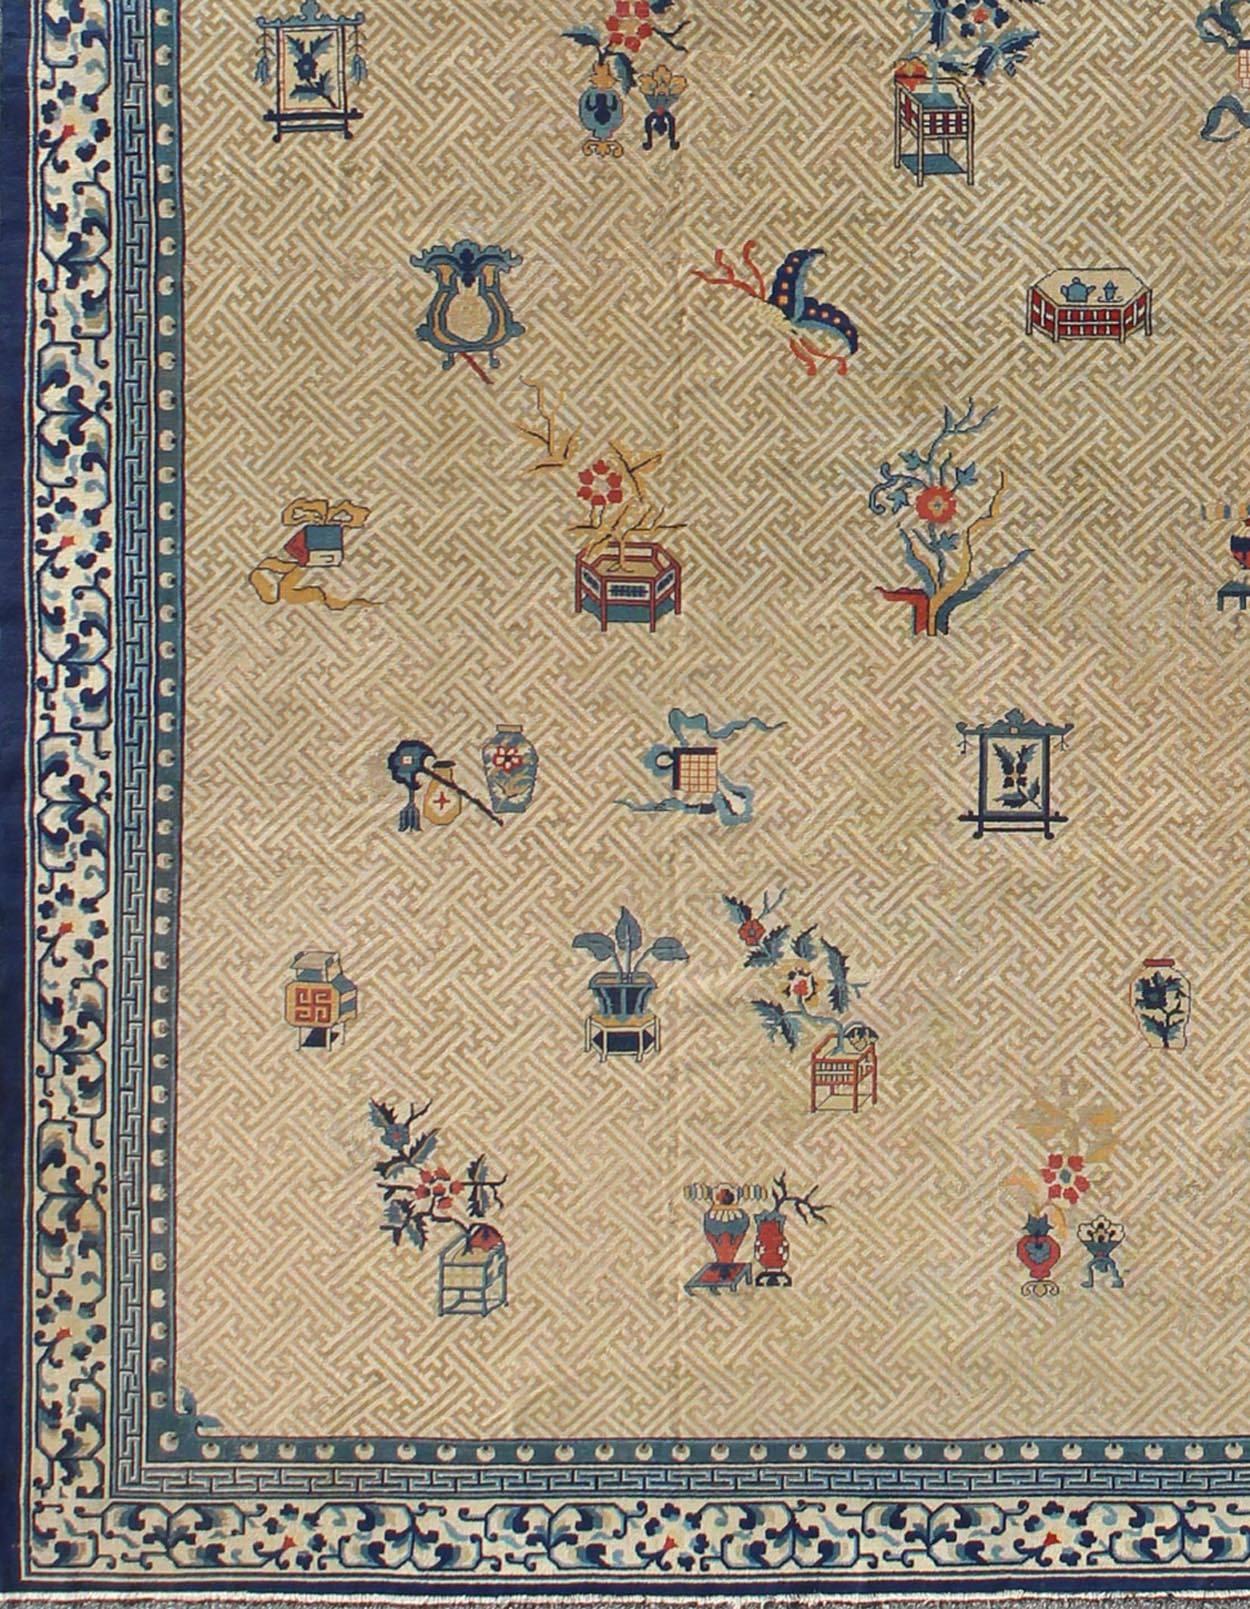 Large Antique Chinese Carpet in Ivory/Taupe Background and Blue Border.
A traditional design incorporating phoenix motifs and Chinese elements distinguishes this Chinese rug from all others. Symbolizing the Emperor and Empress, the dragon and